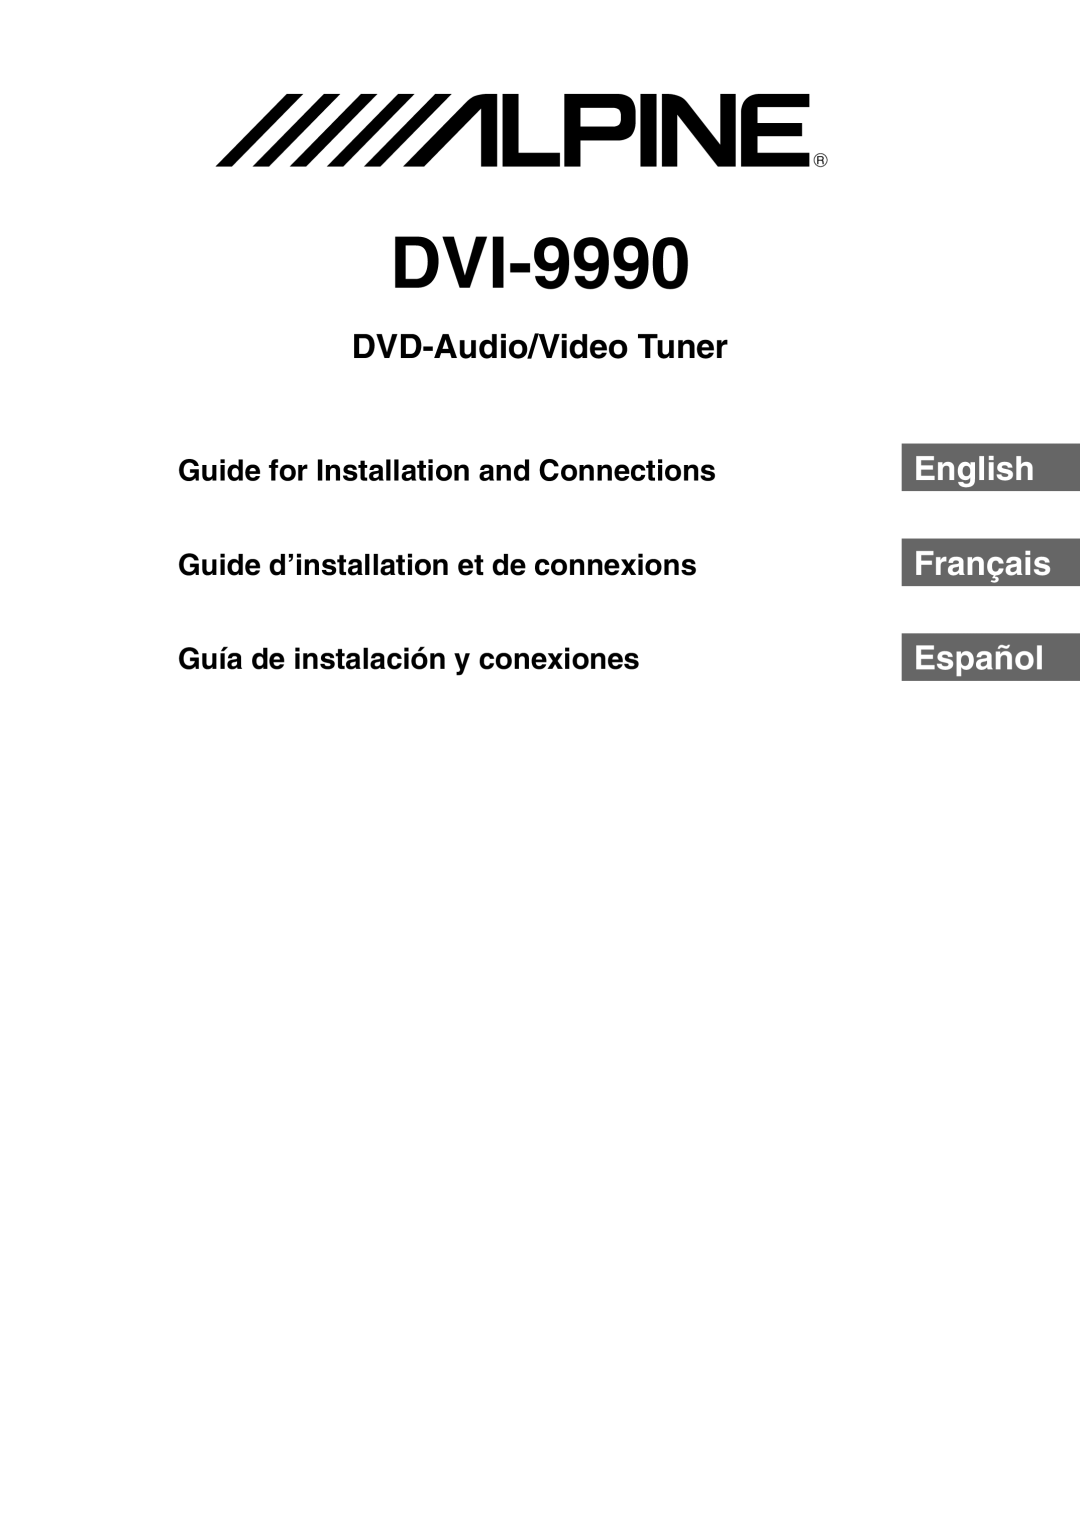 Alpine DVI-9990 manual DVD-Audio/Video Tuner, English, Français, Español, Guide for Installation and Connections 